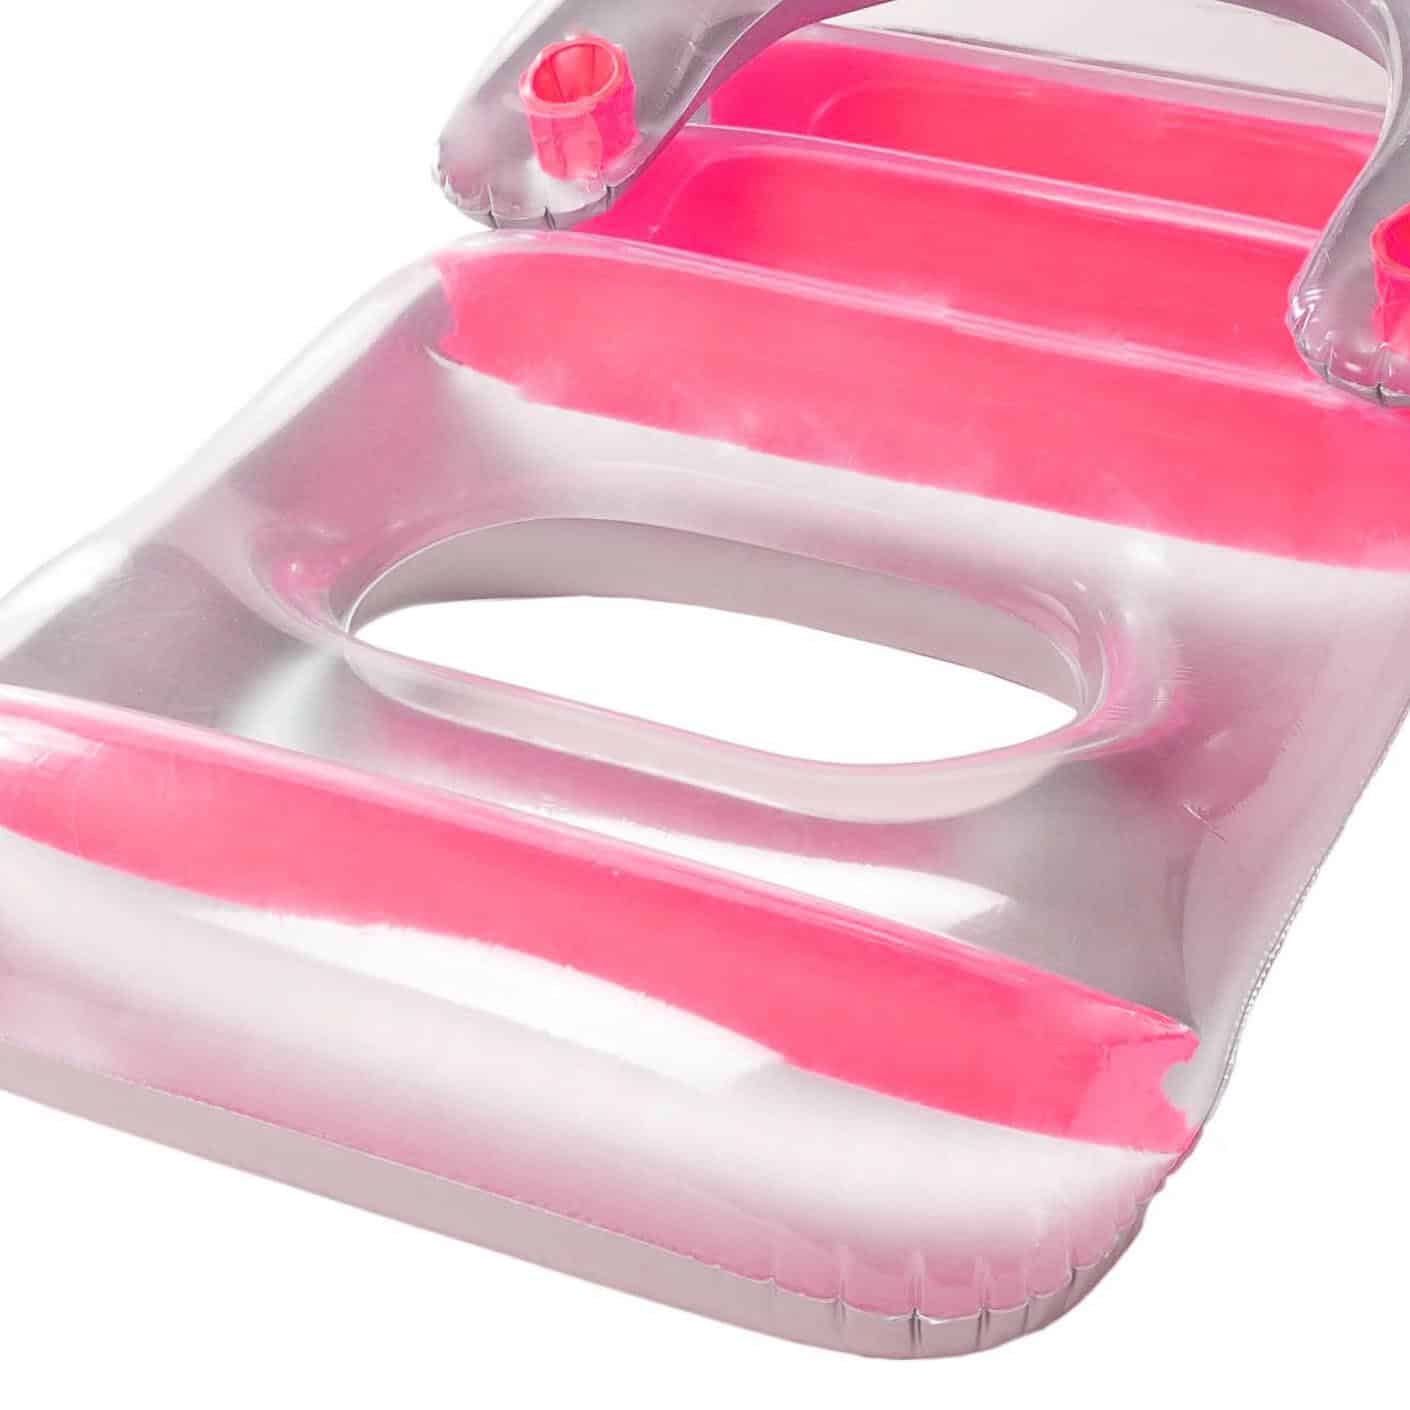 Swimline Deluxe Lounge Chair Colors May Vary Pink or Blue 